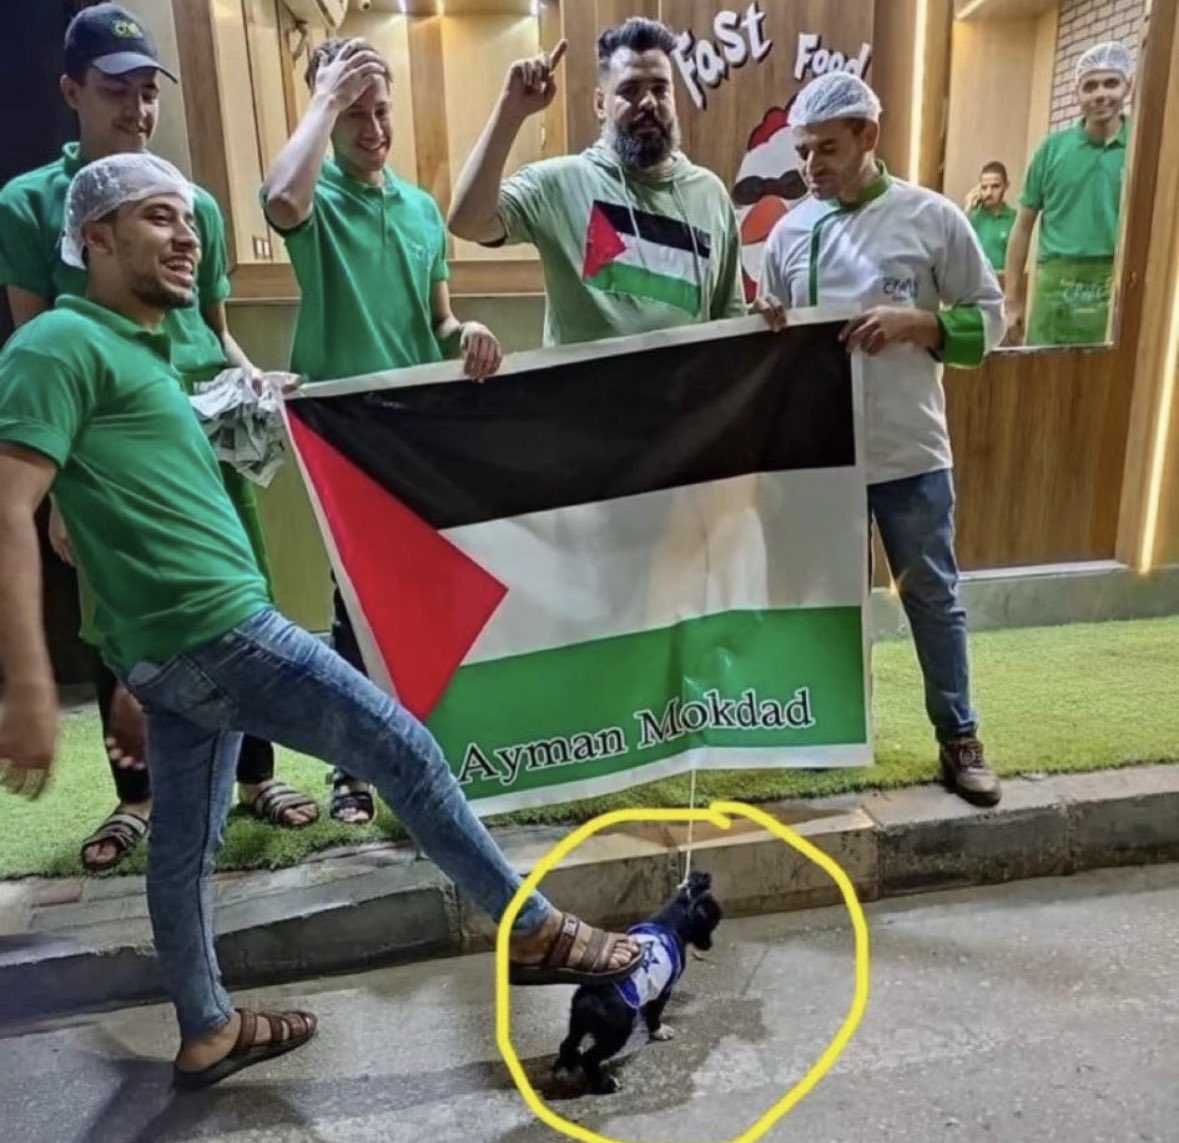 Palestinian supporters step on a puppy wrapped in the Israeli flag. They also attach a zip tie and string around the young puppy’s neck to the Palestinian flag as they smile and laugh.